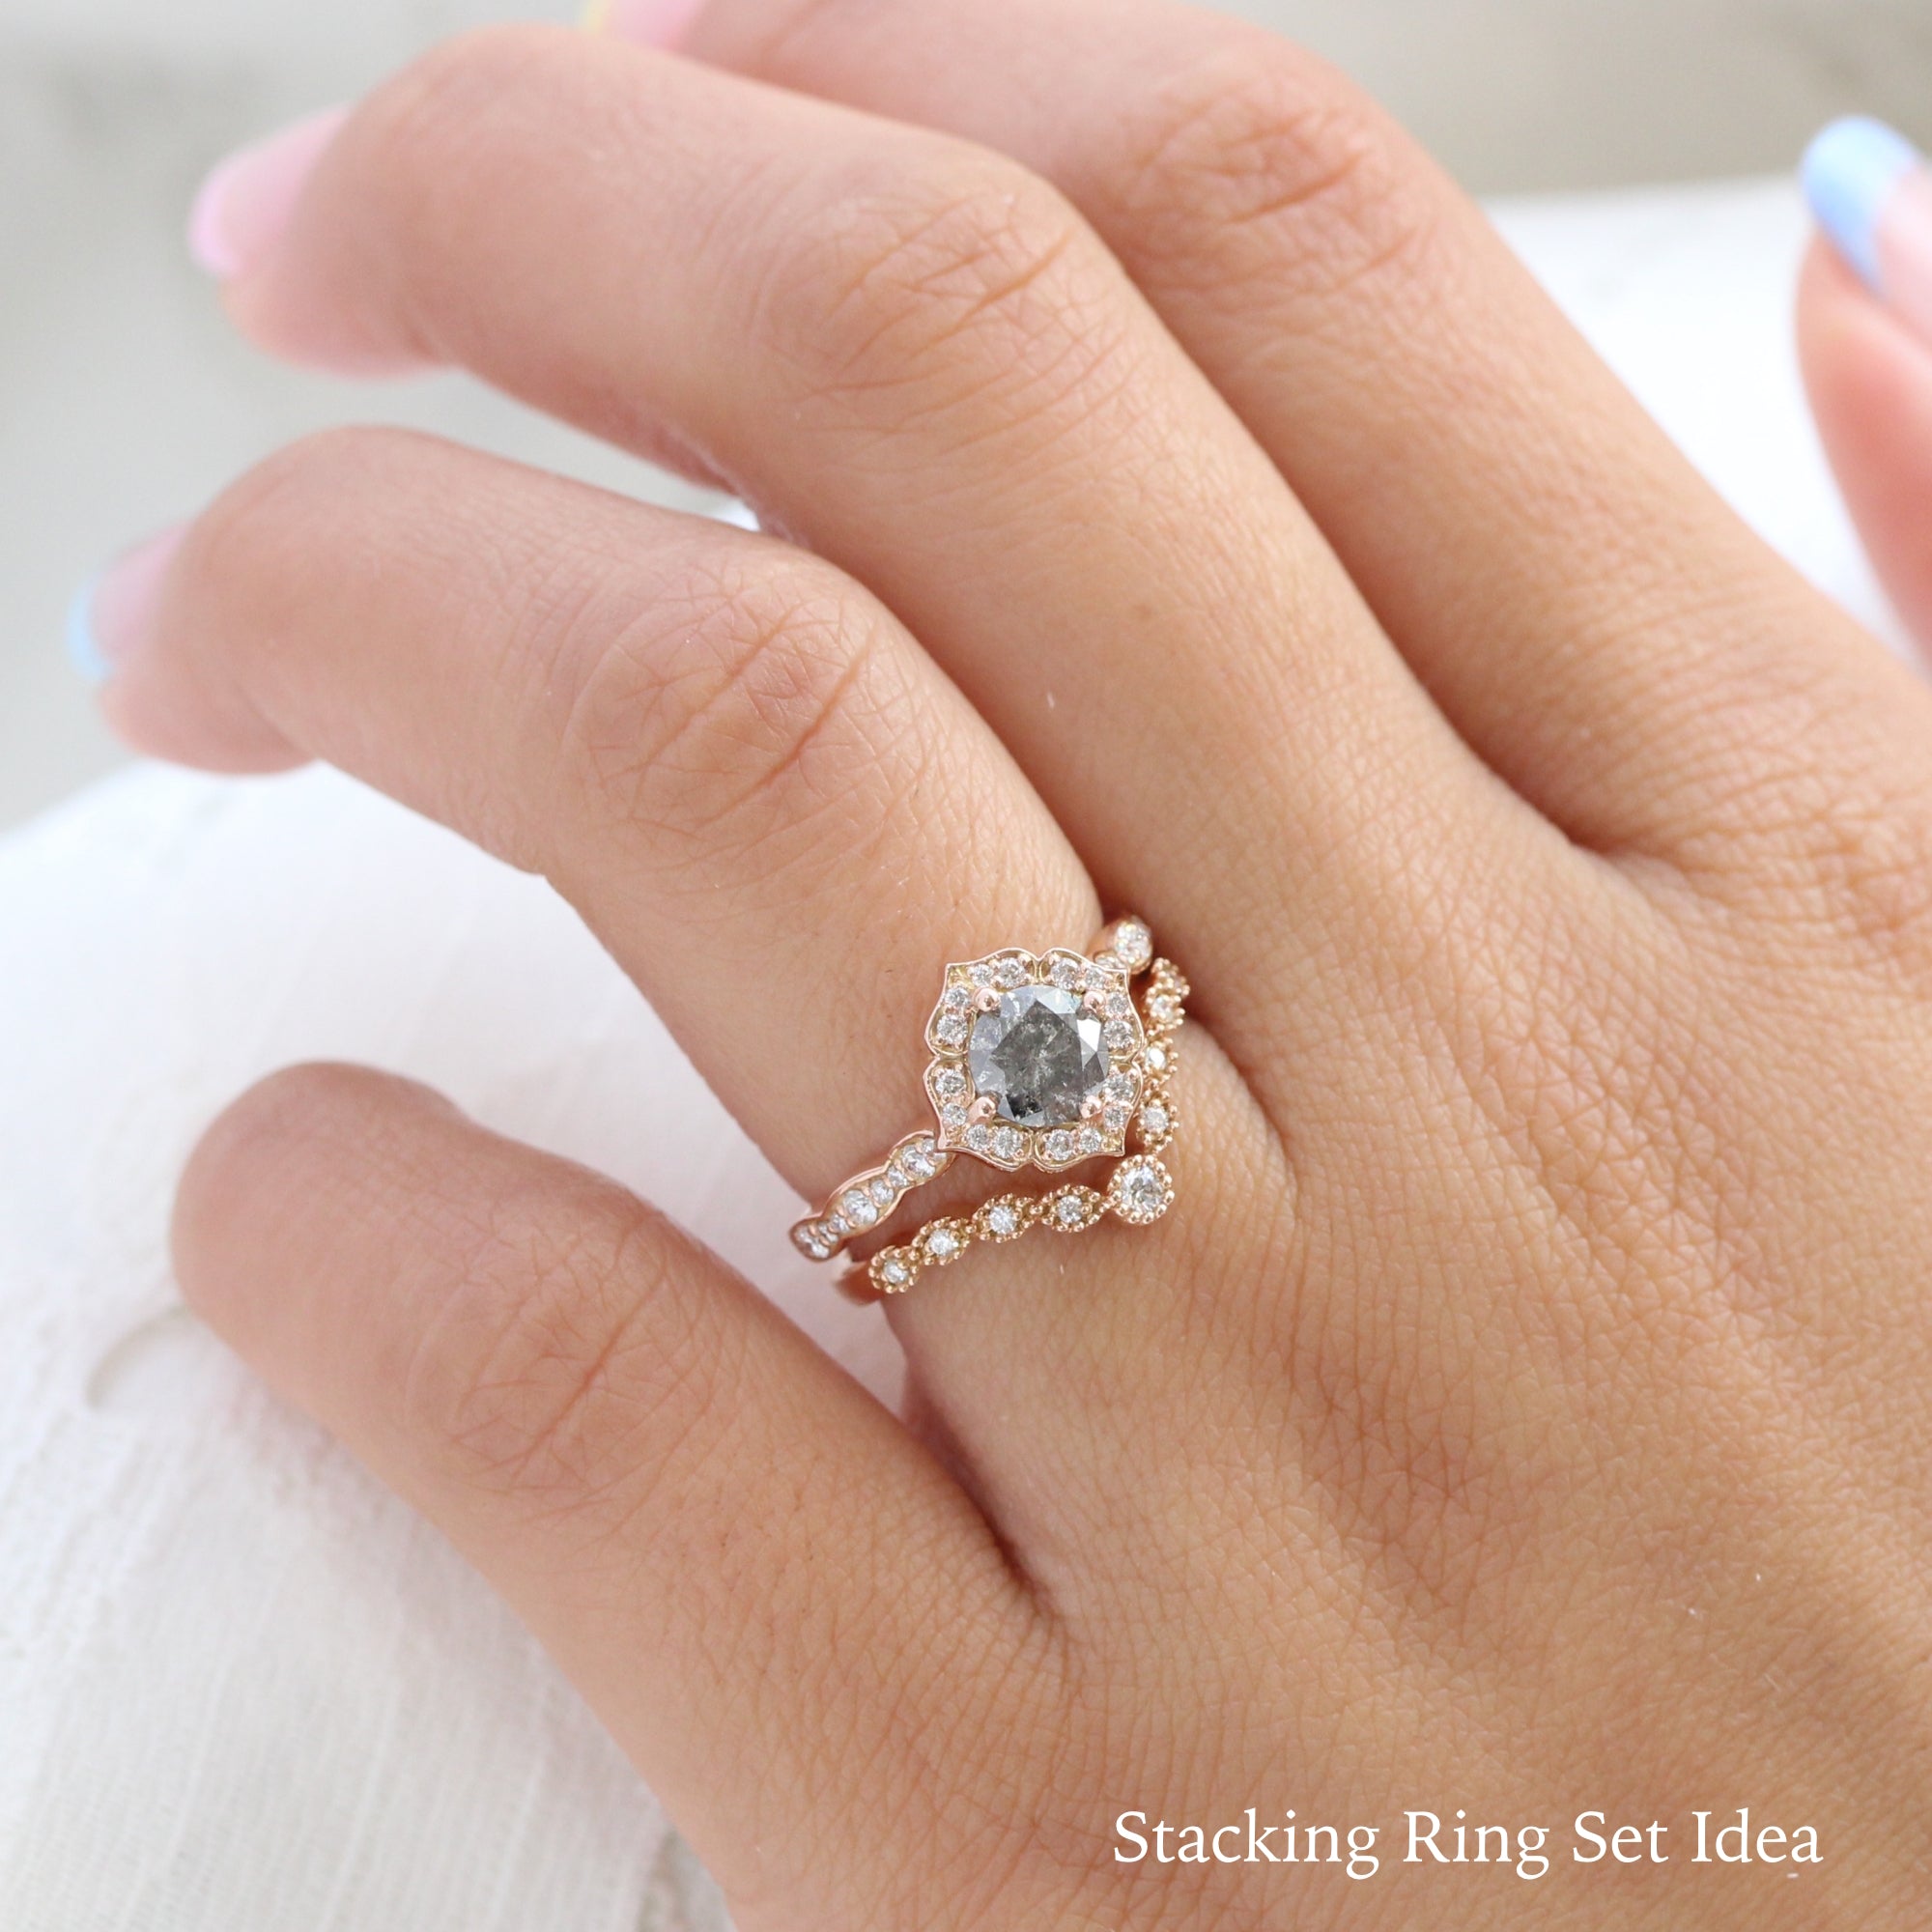 Natural Salt and Pepper Diamond Ring w/ Diamond in Mini Vintage Floral Ring